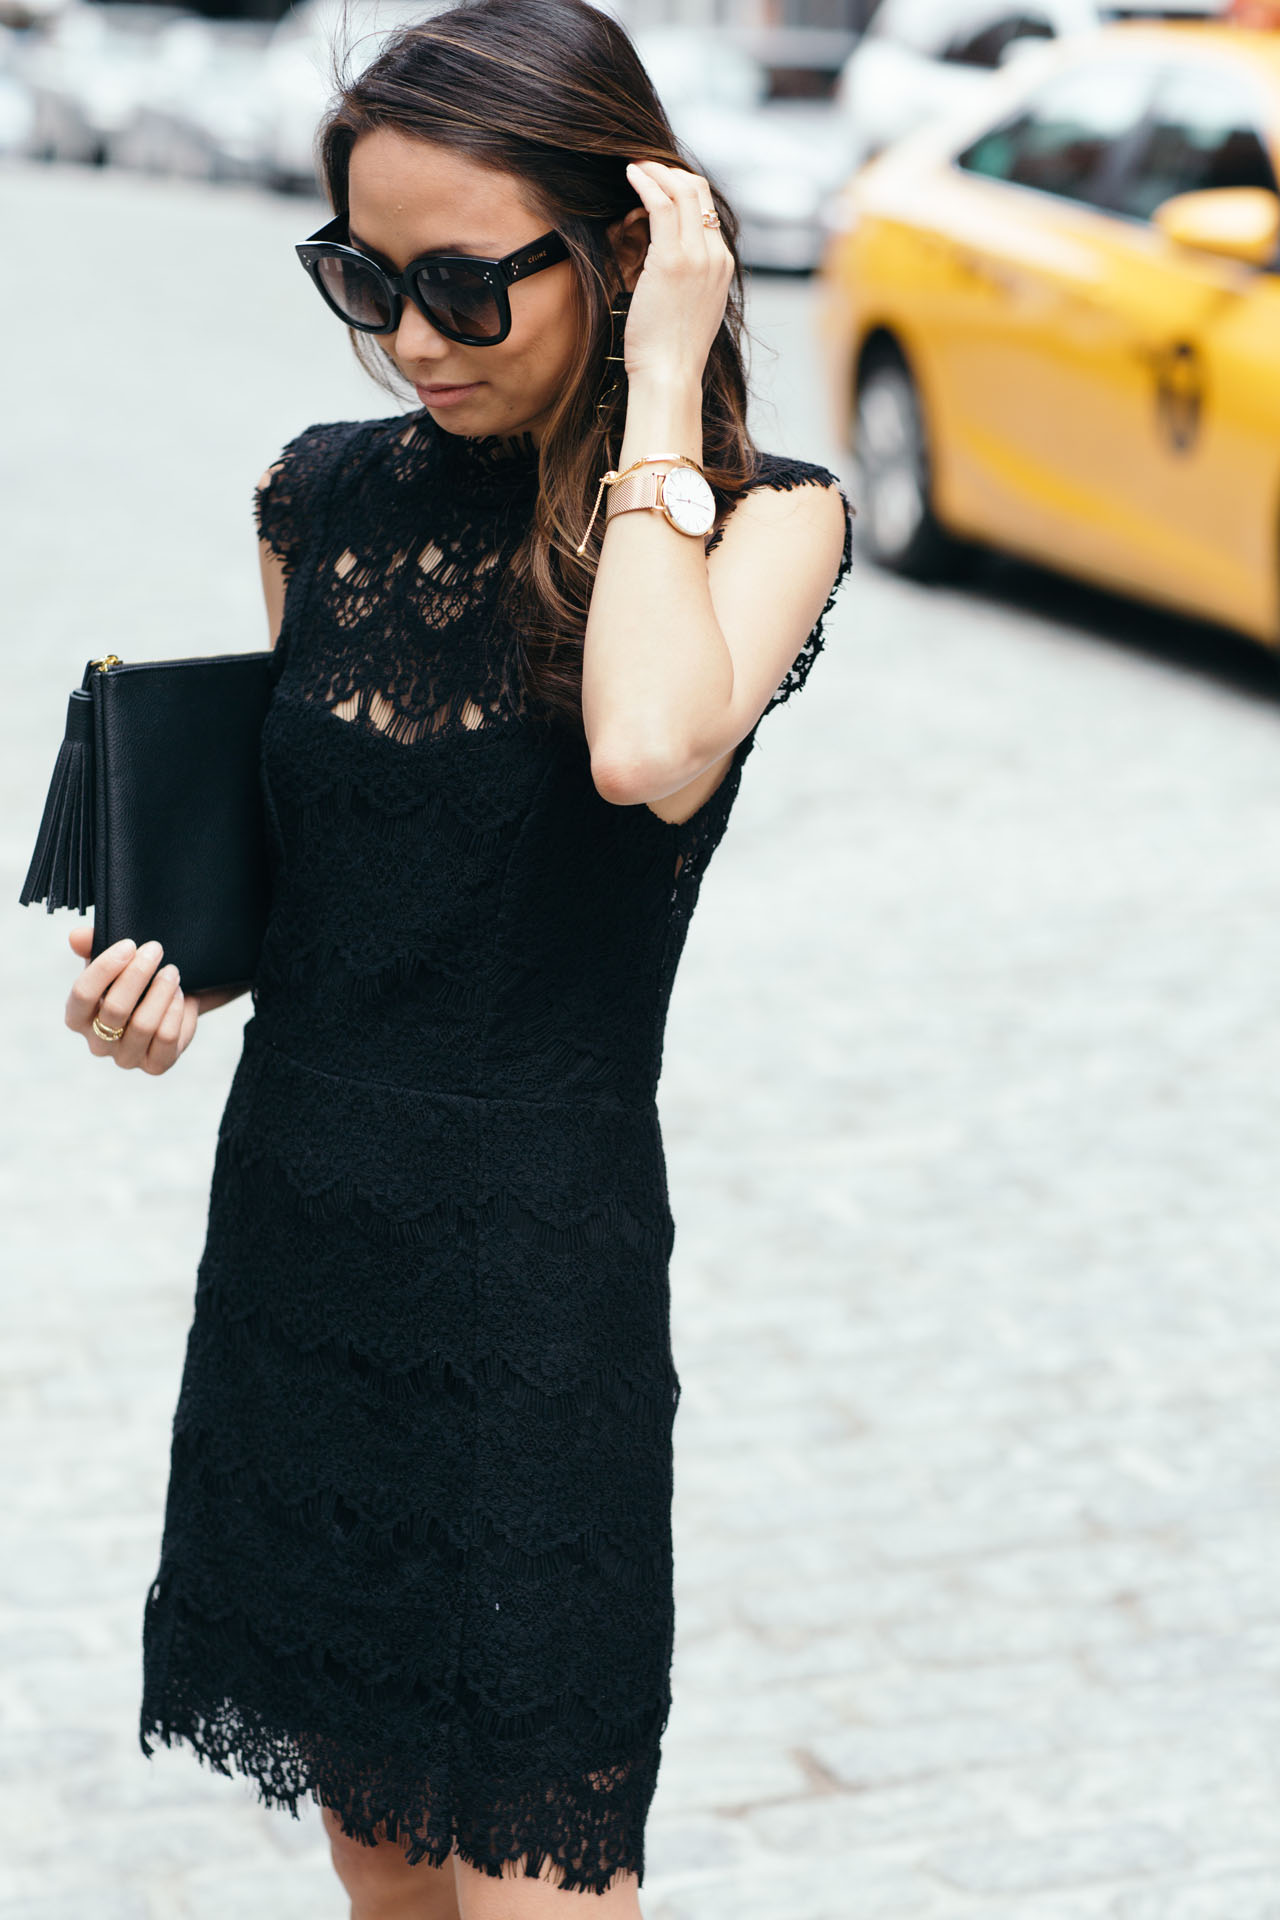 free people, lace dress, lace black dress, dresses under $100, petite bloggers, the view from 5 ft. 2, christine petric